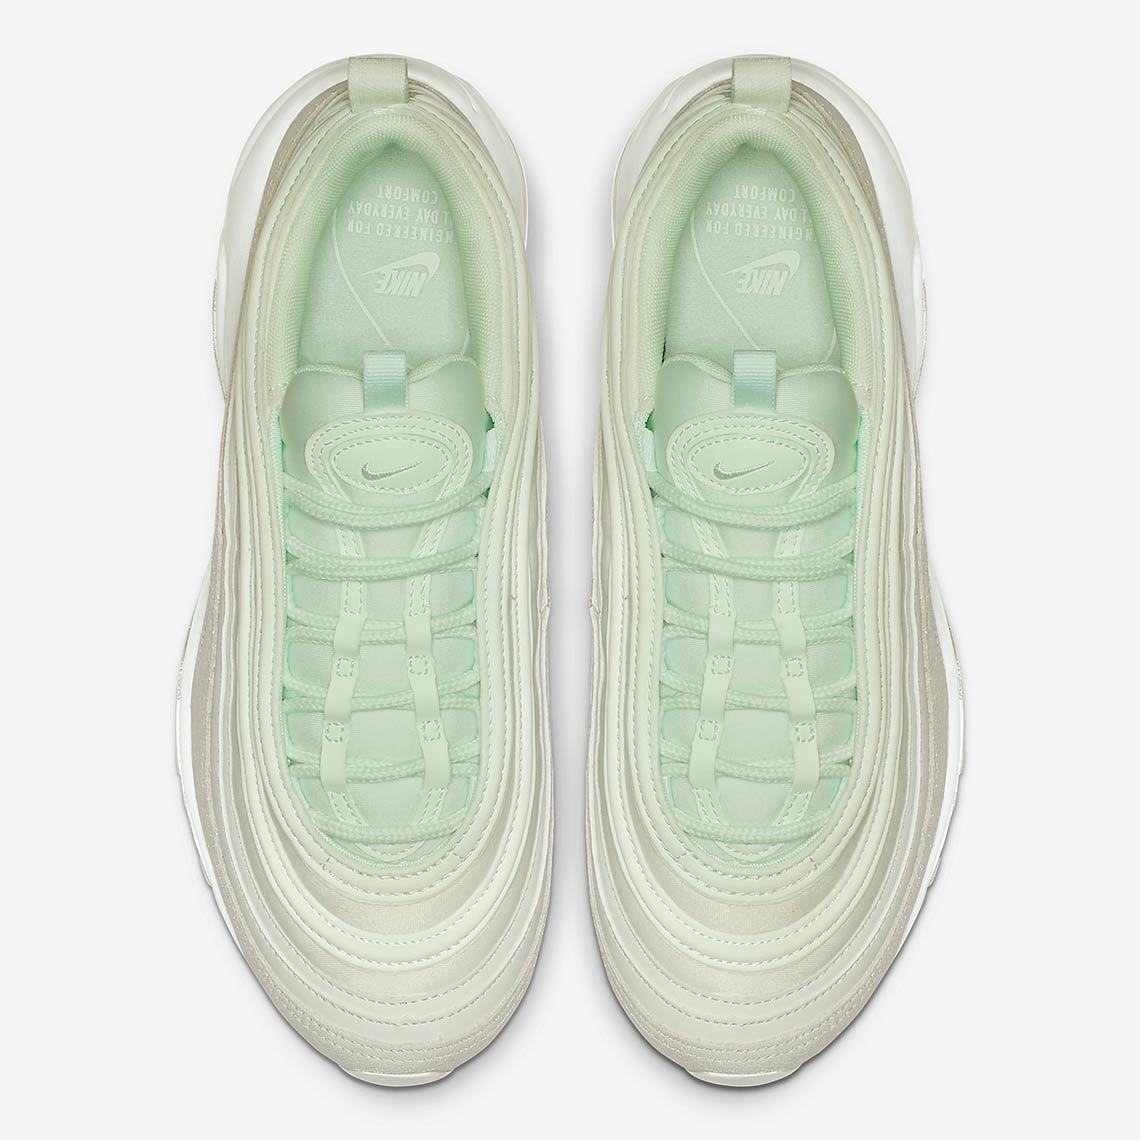 Nike Air Max 97 "Barely Green" Is Coming Soon